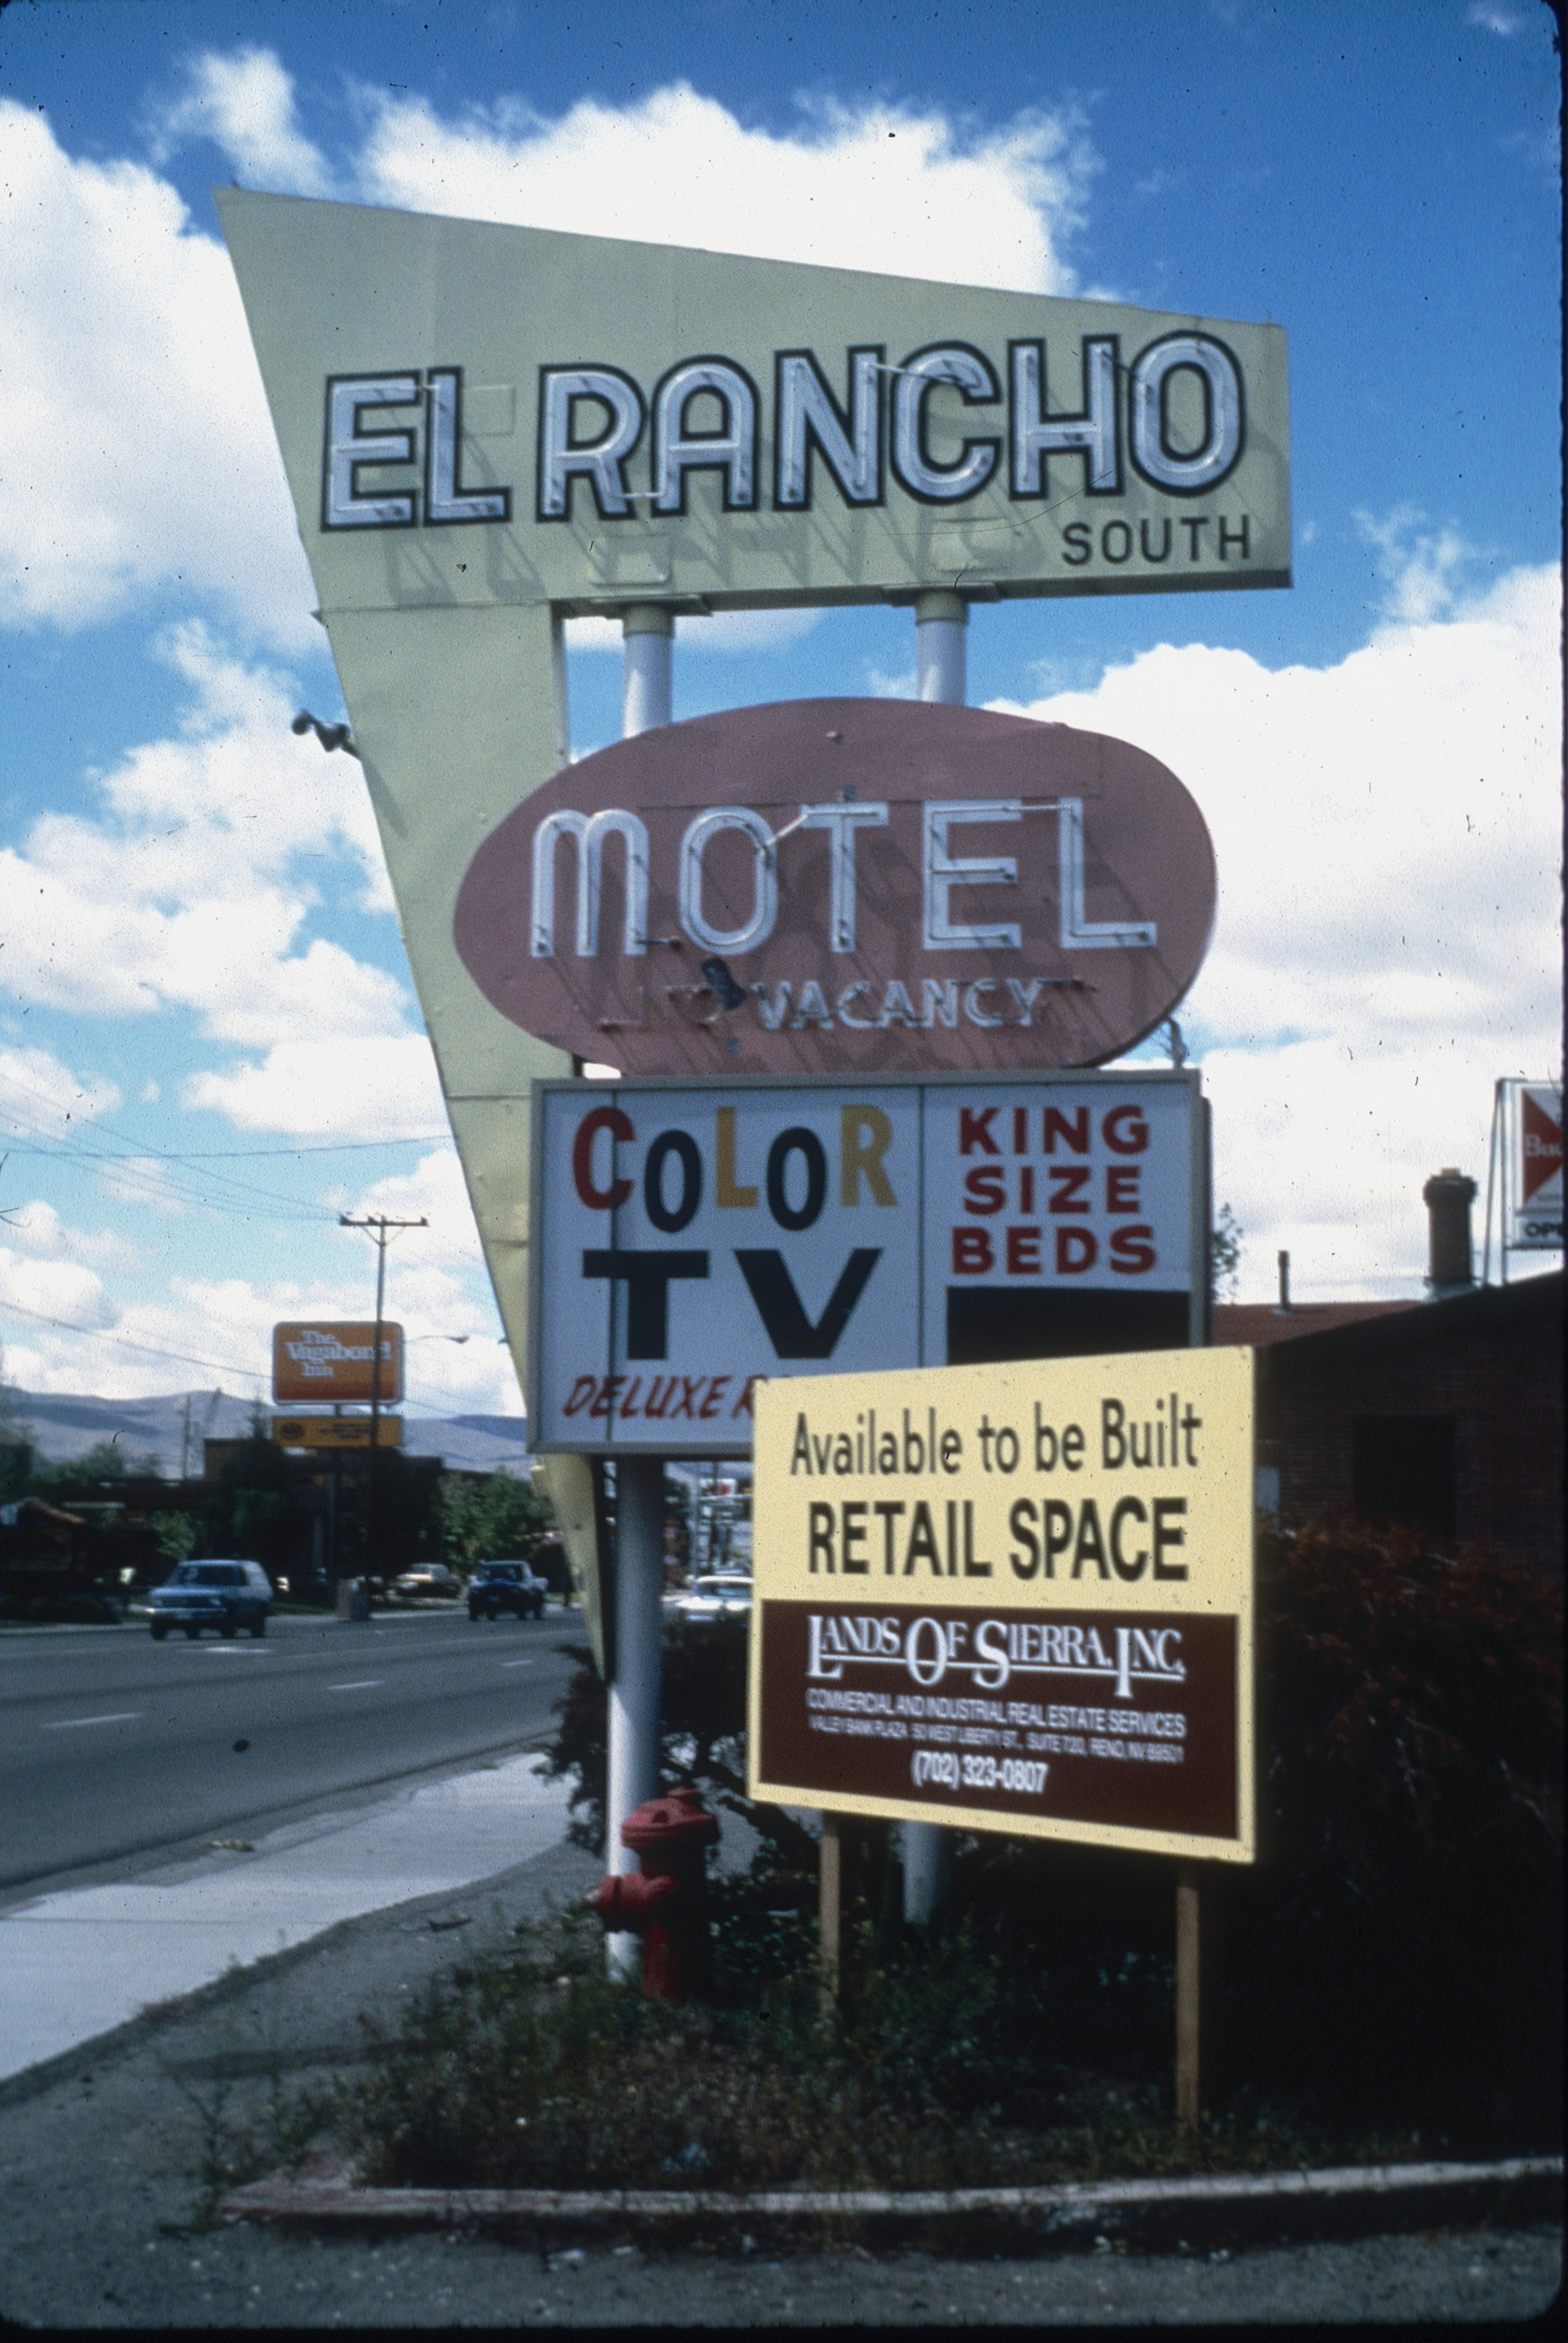 Slide of the neon sign for the El Rancho South Motel, 1986